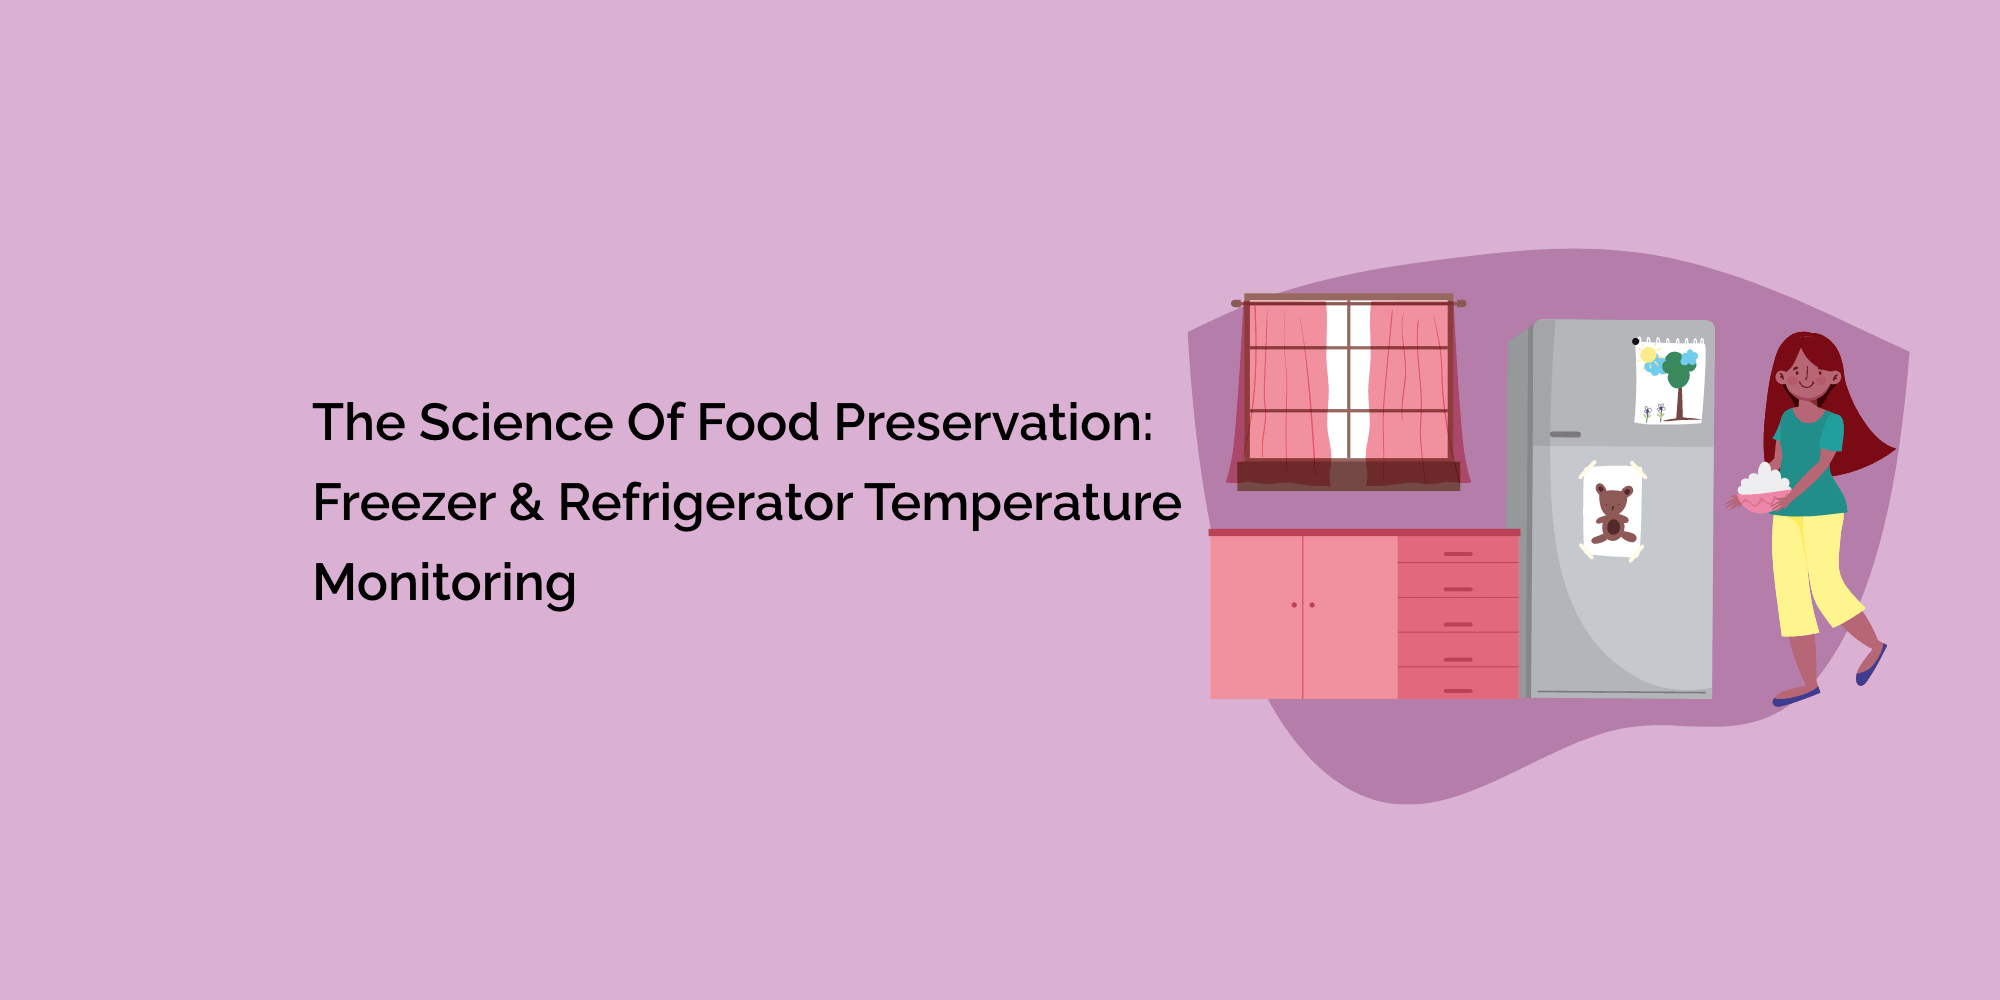 The Science of Food Preservation: Freezer & Refrigerator Temperature Monitoring